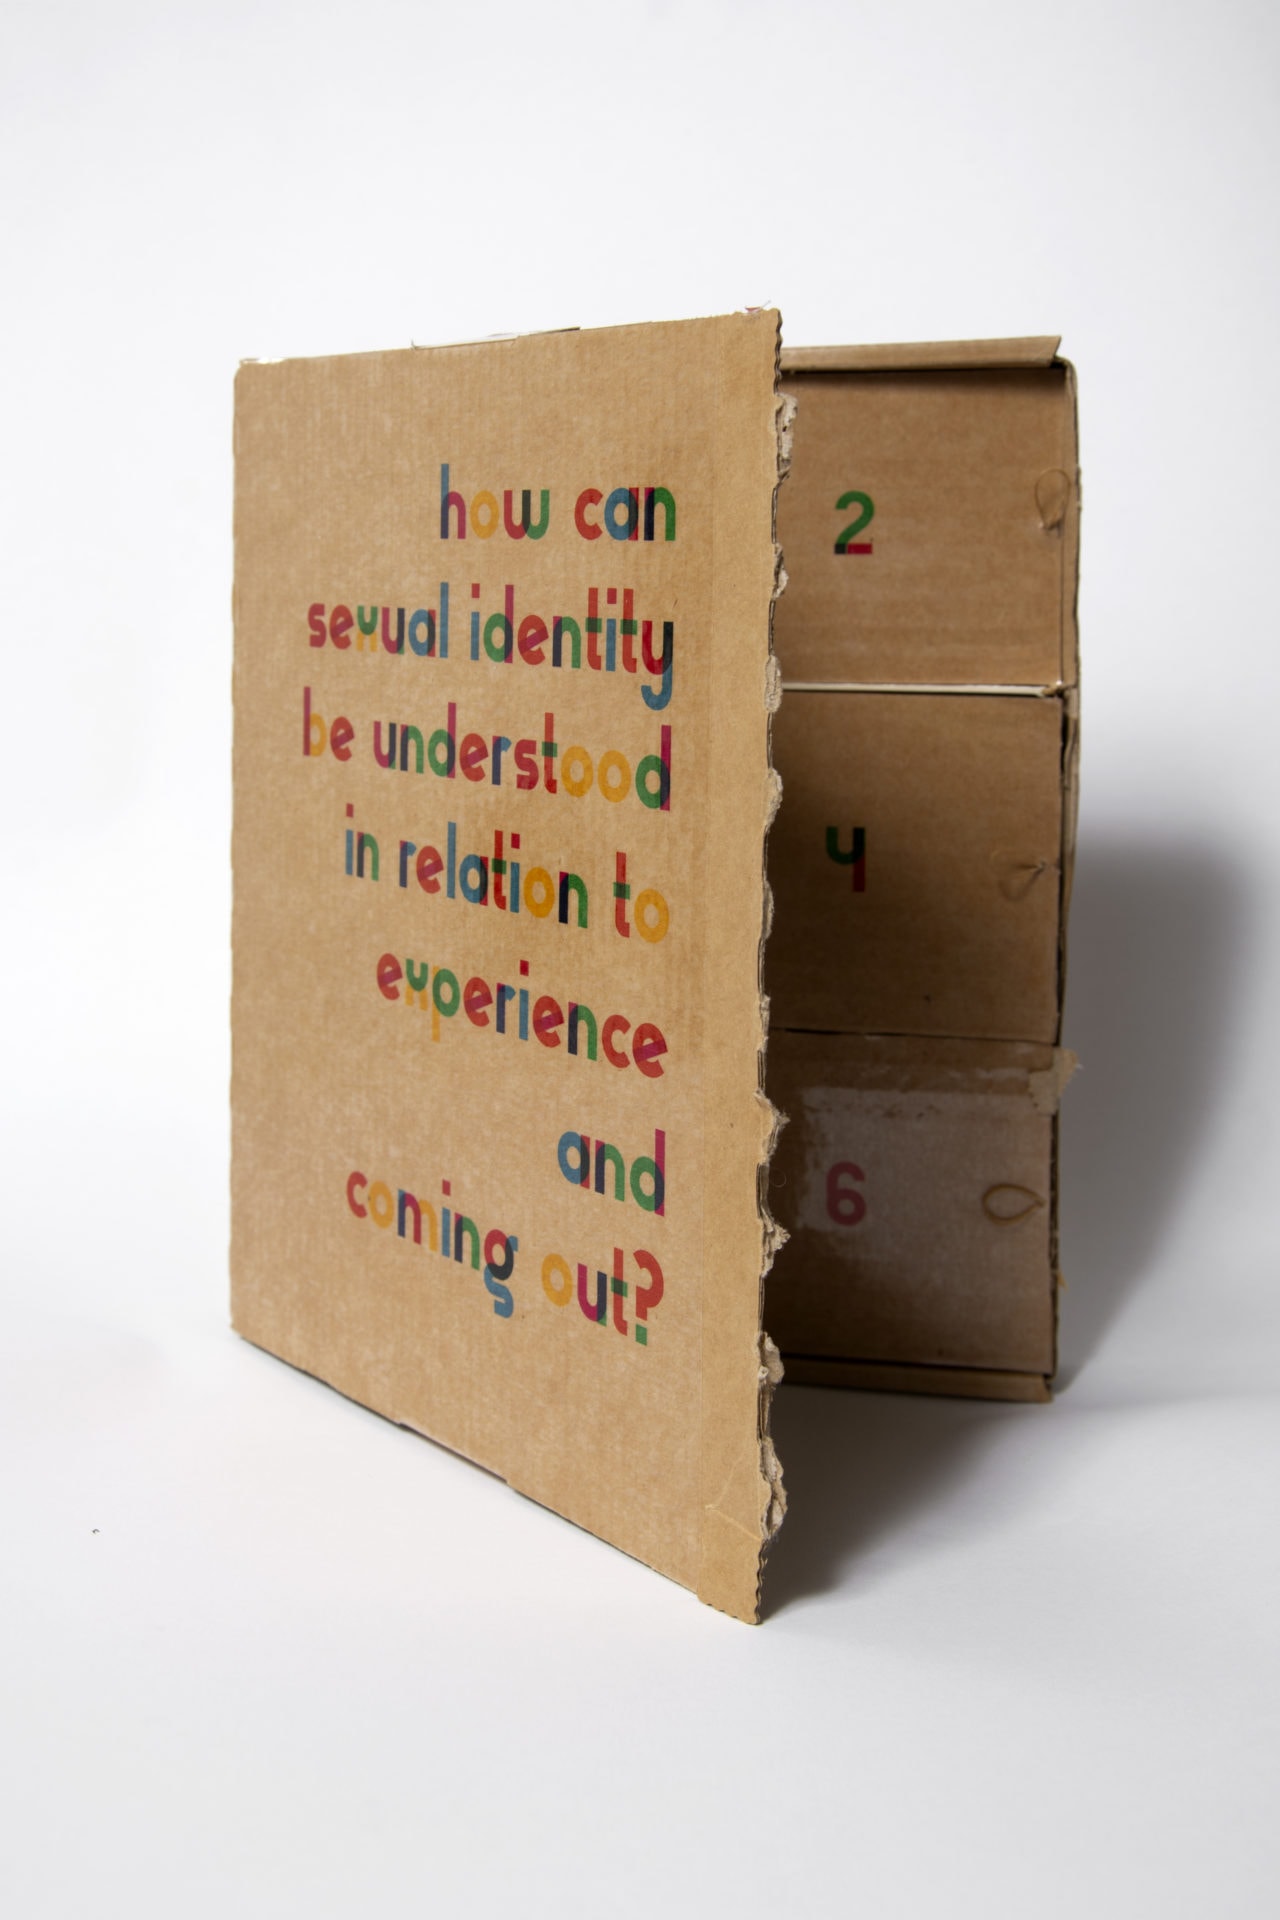 Cardboard folded like a half-open closet, it says on it 'how can sexual identity be understood in relation to experience and coming out?'.